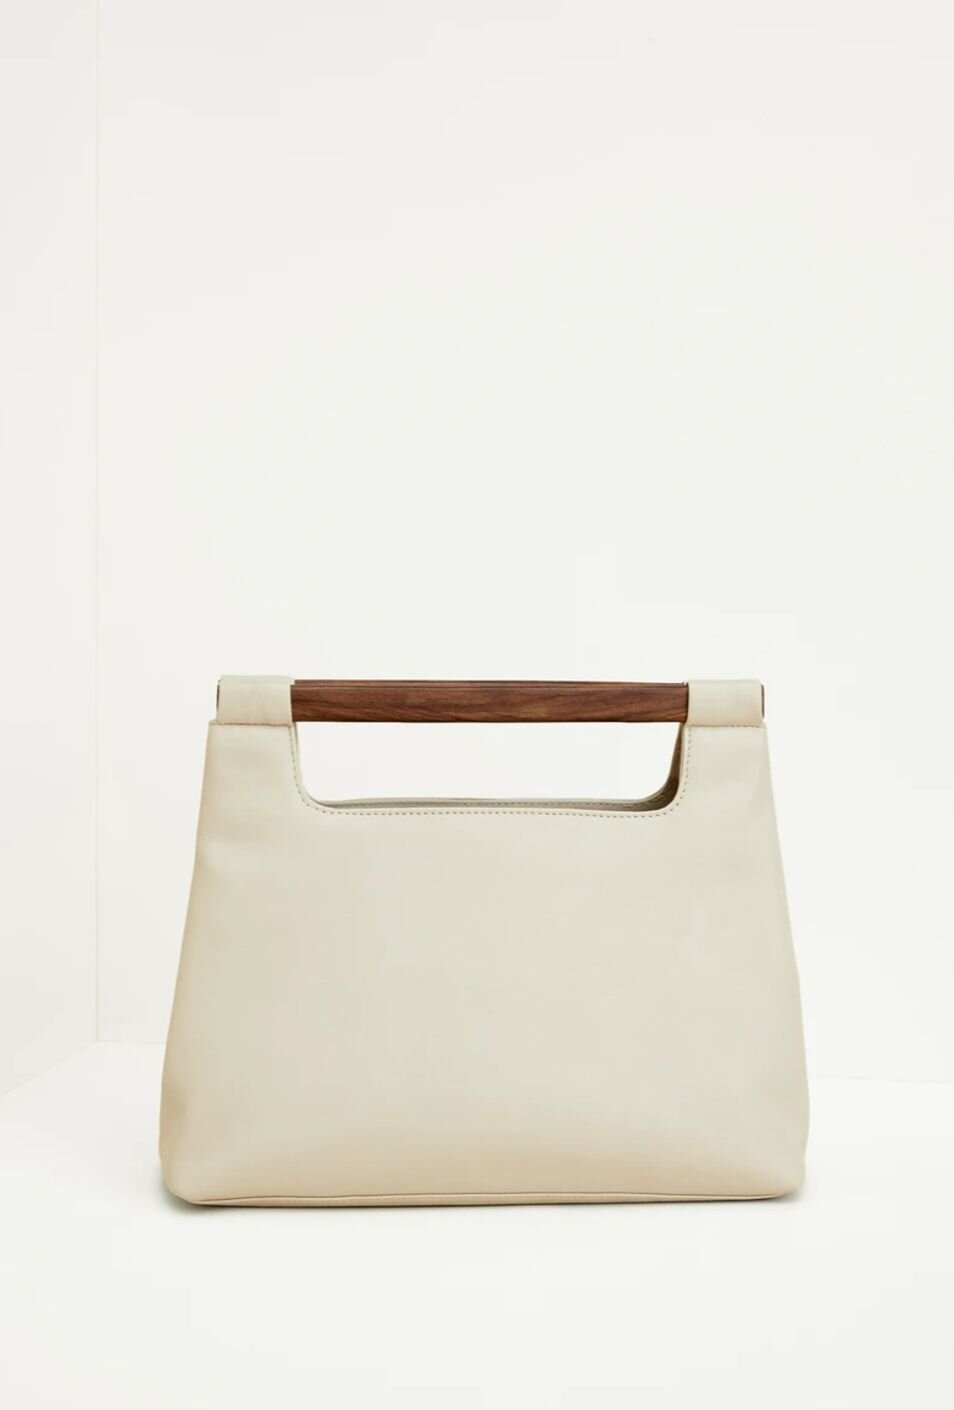 Amour Vert: Payton James Wood Cut Out Tote